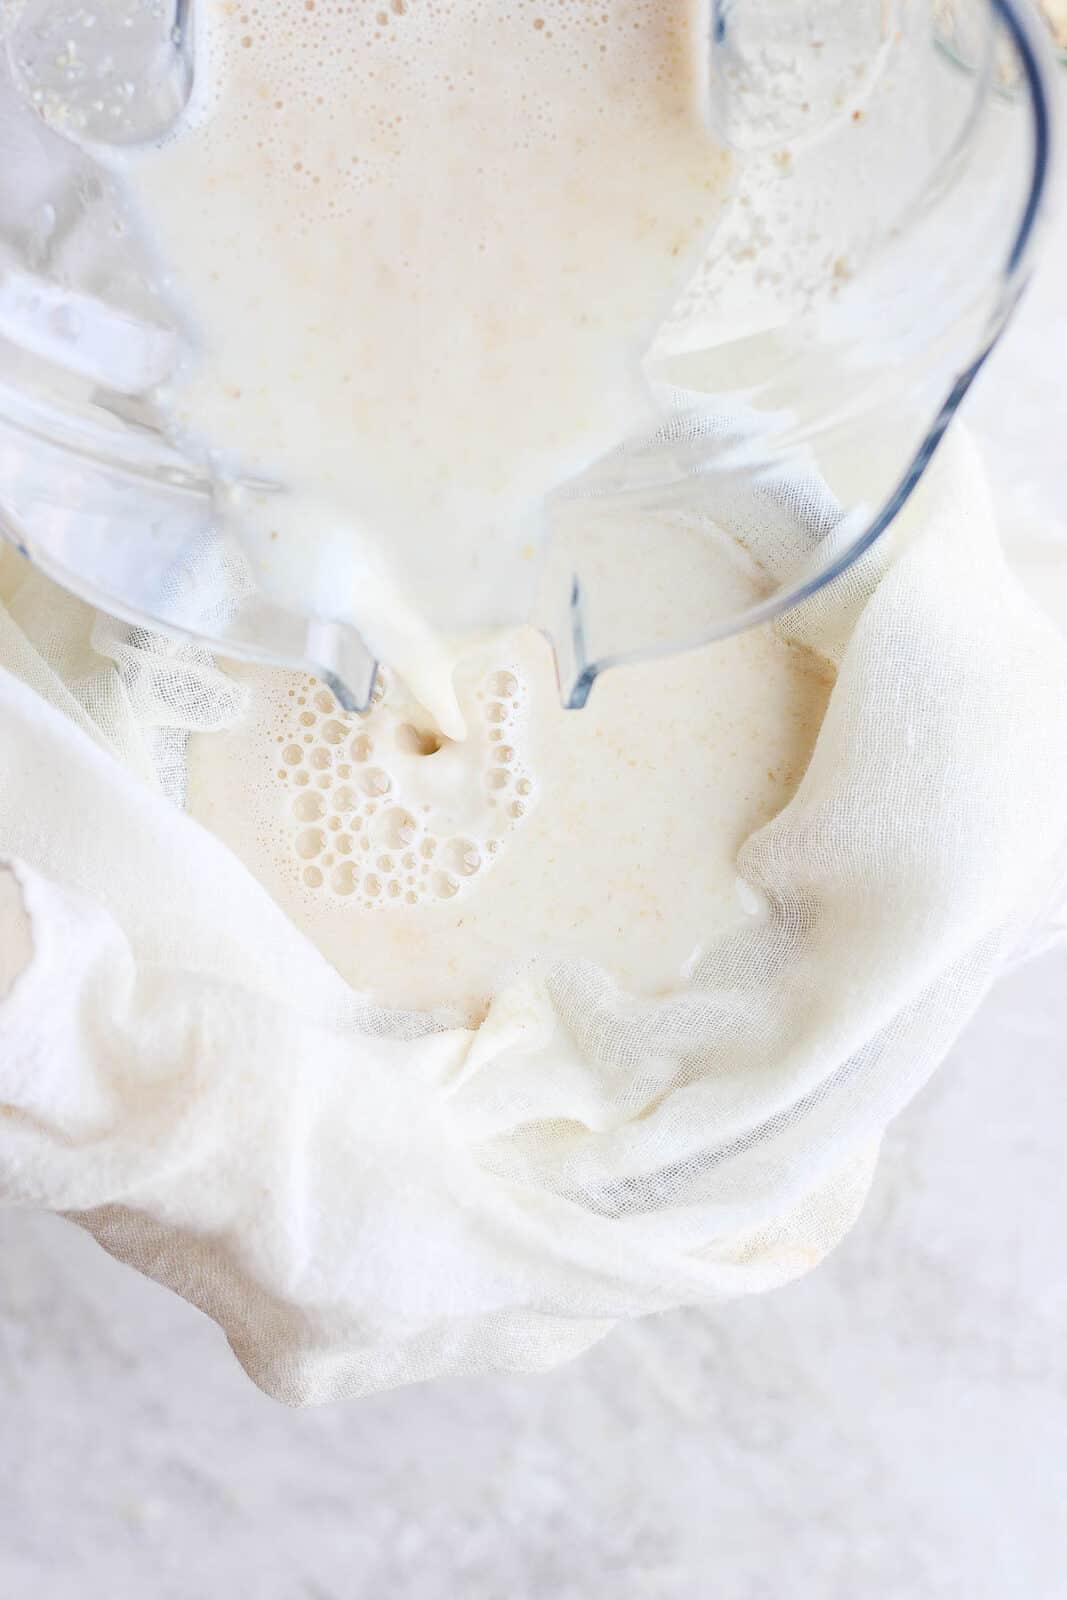 Oat milk being poured into a cheesecloth.